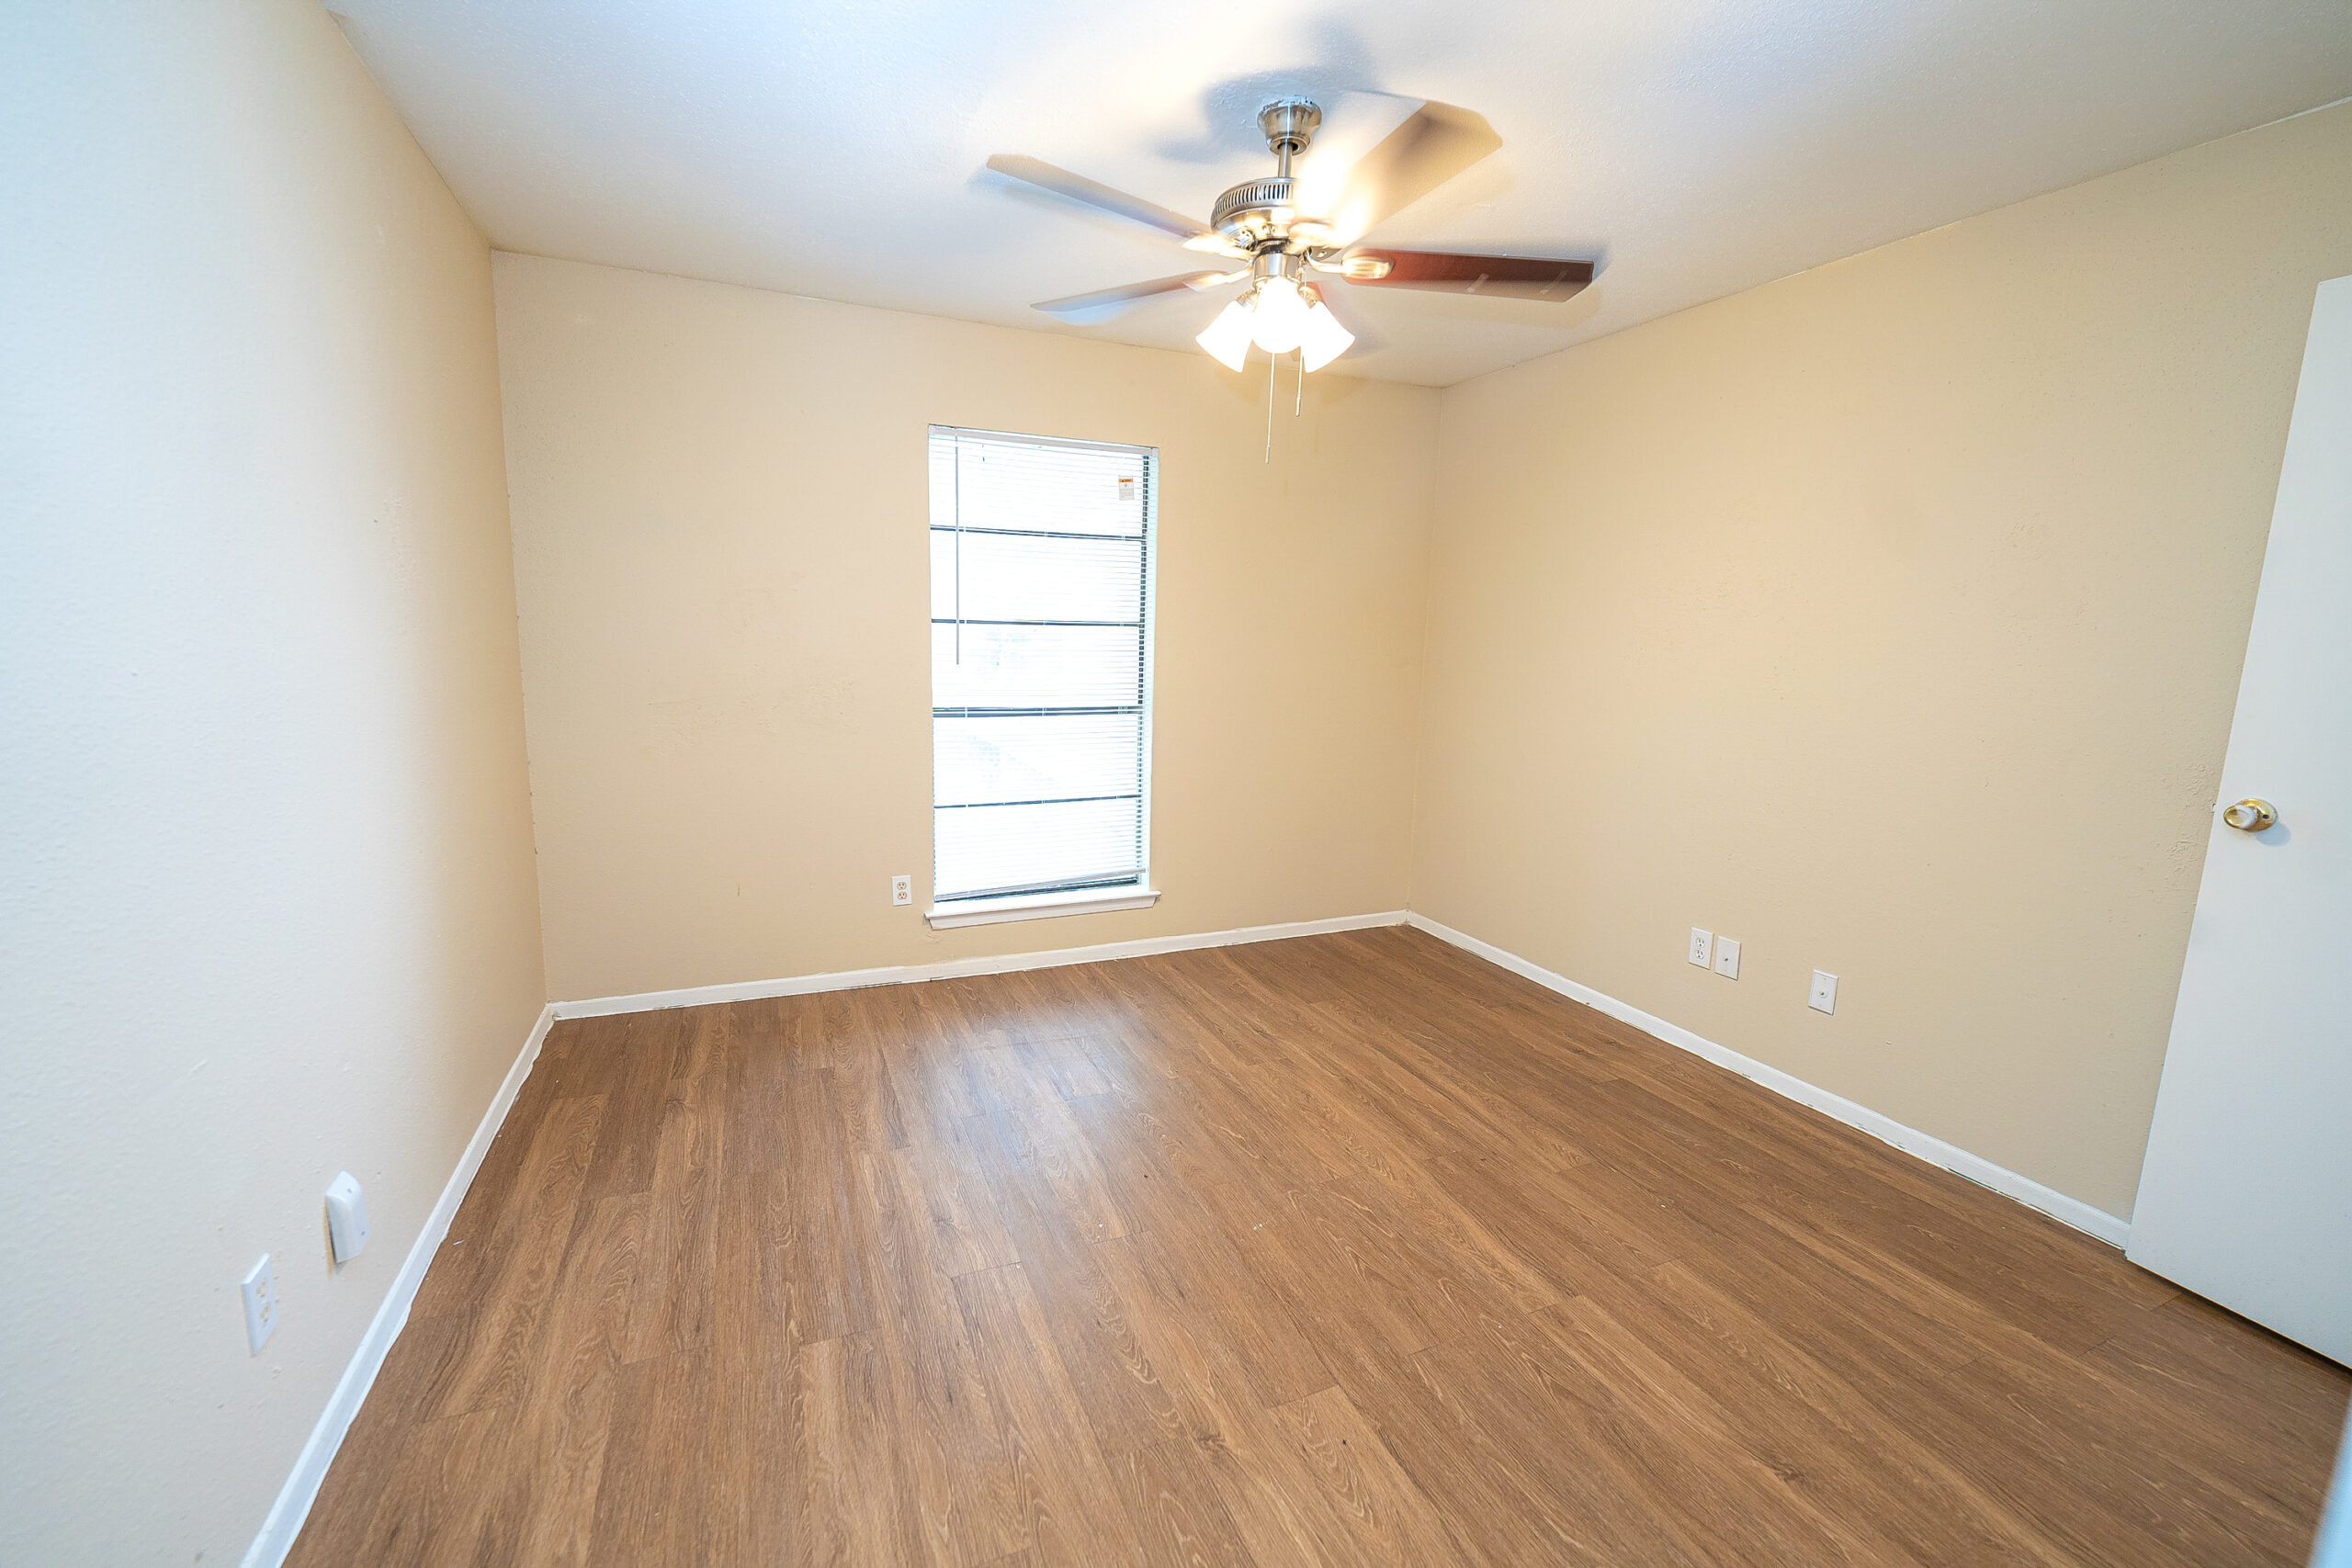 Forest Pointe Apartments – 1BR